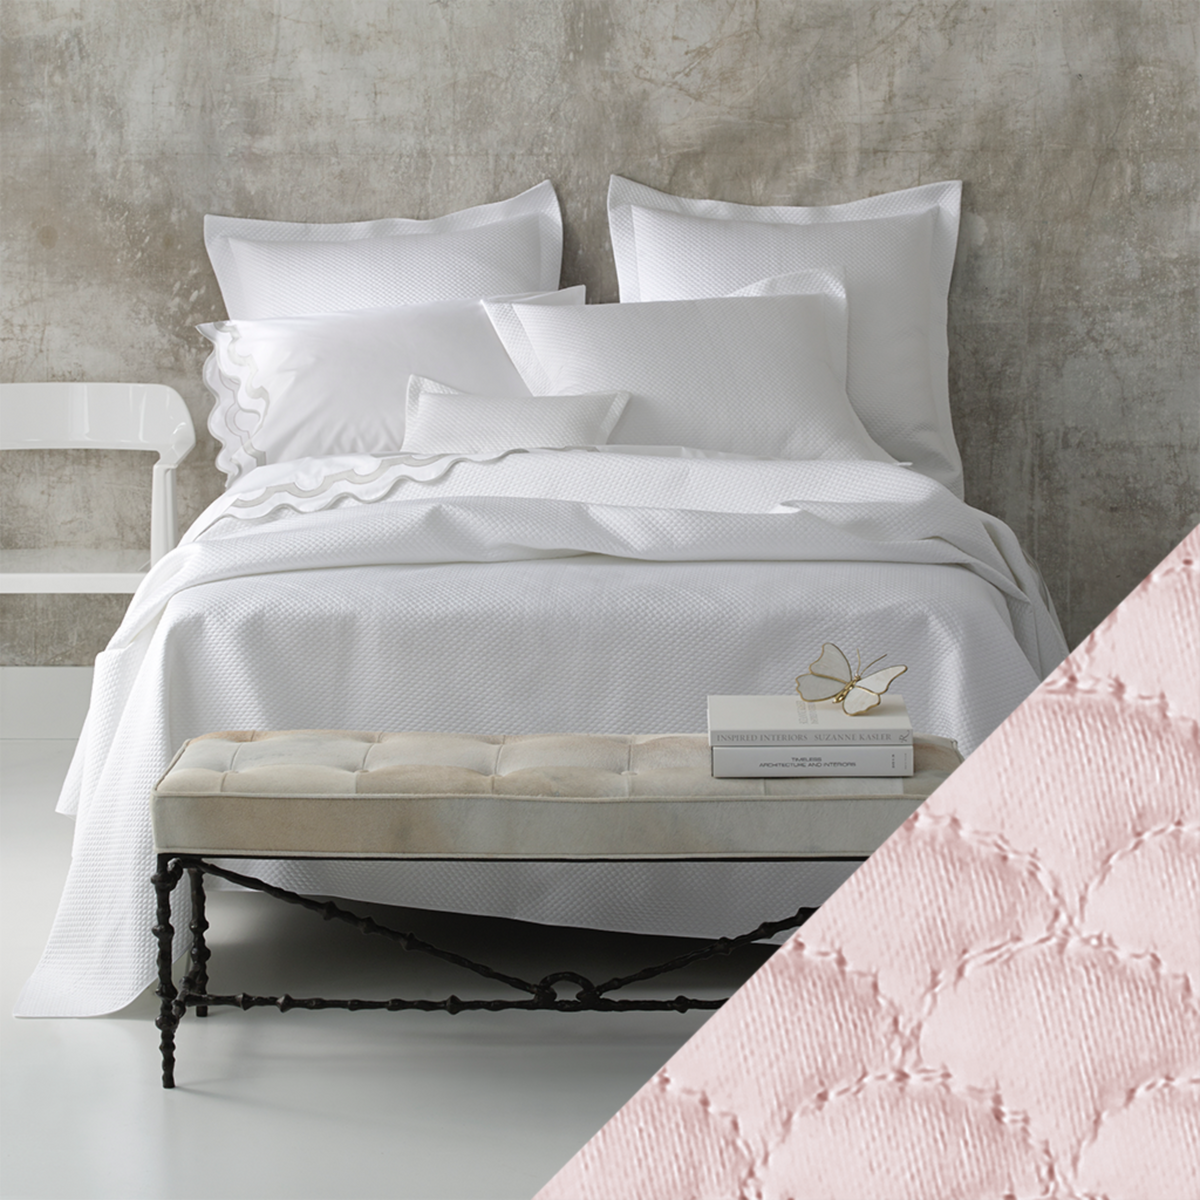 Full View of Matouk Alba Bedding with Pink Color Sample